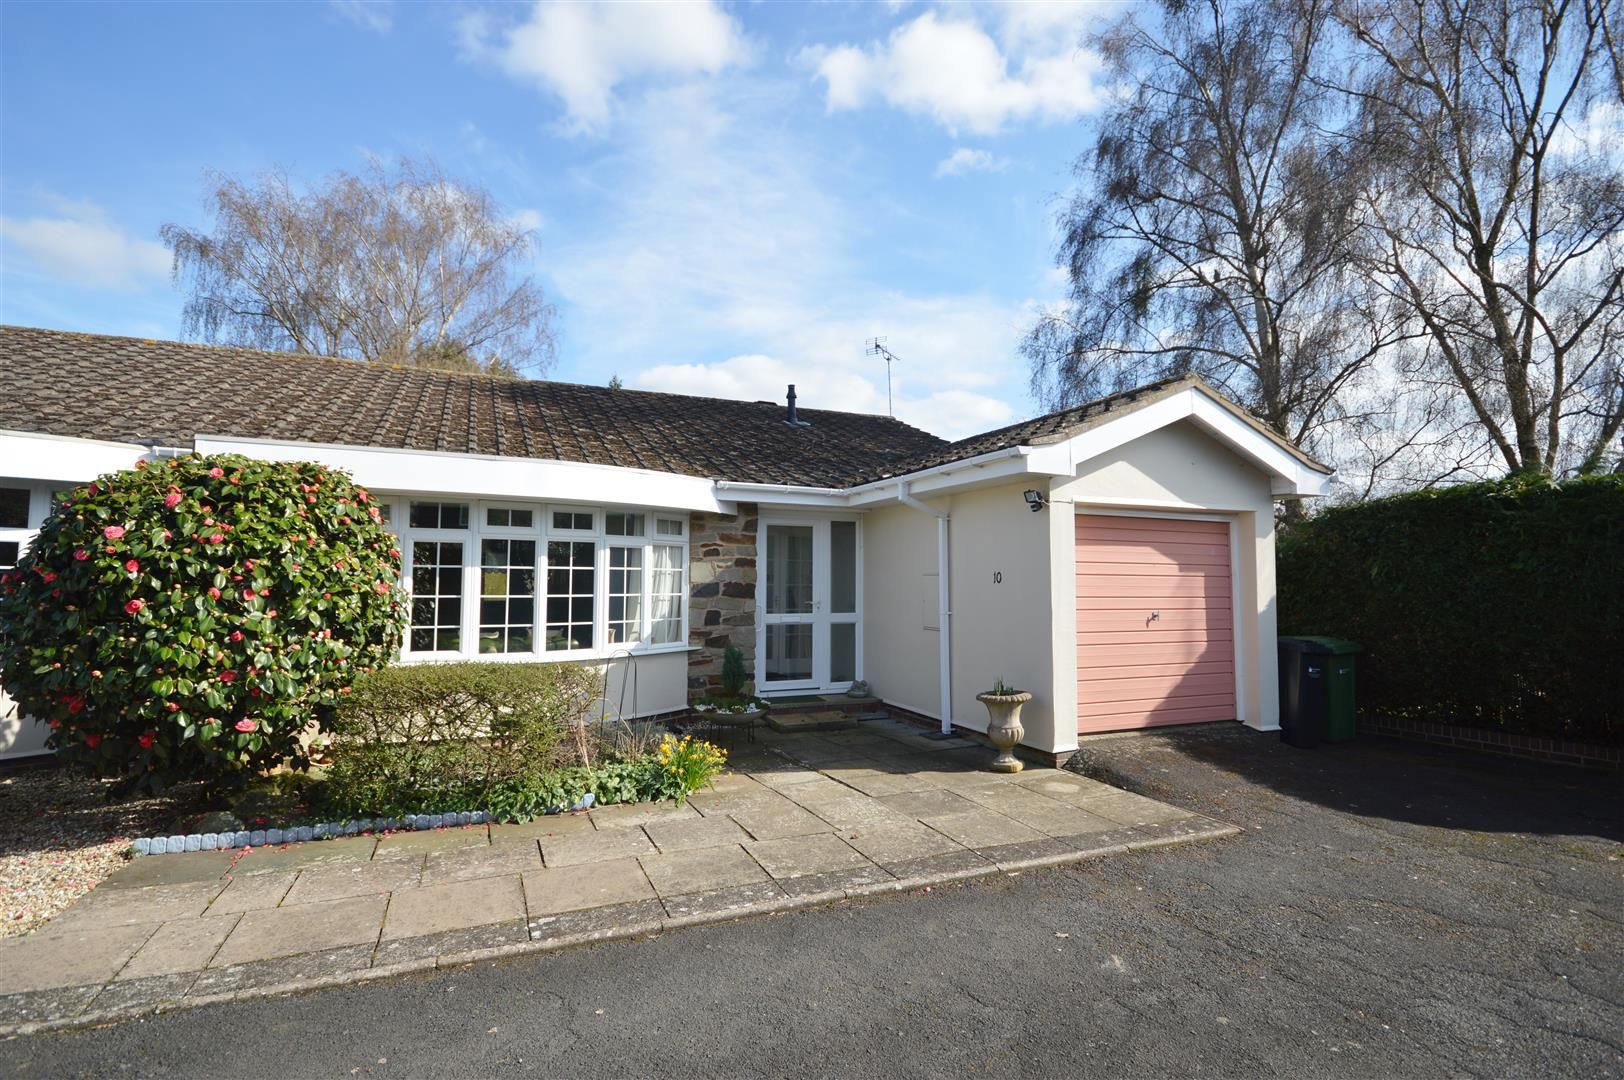 2 bed semi-detached bungalow for sale in Leominster  - Property Image 1